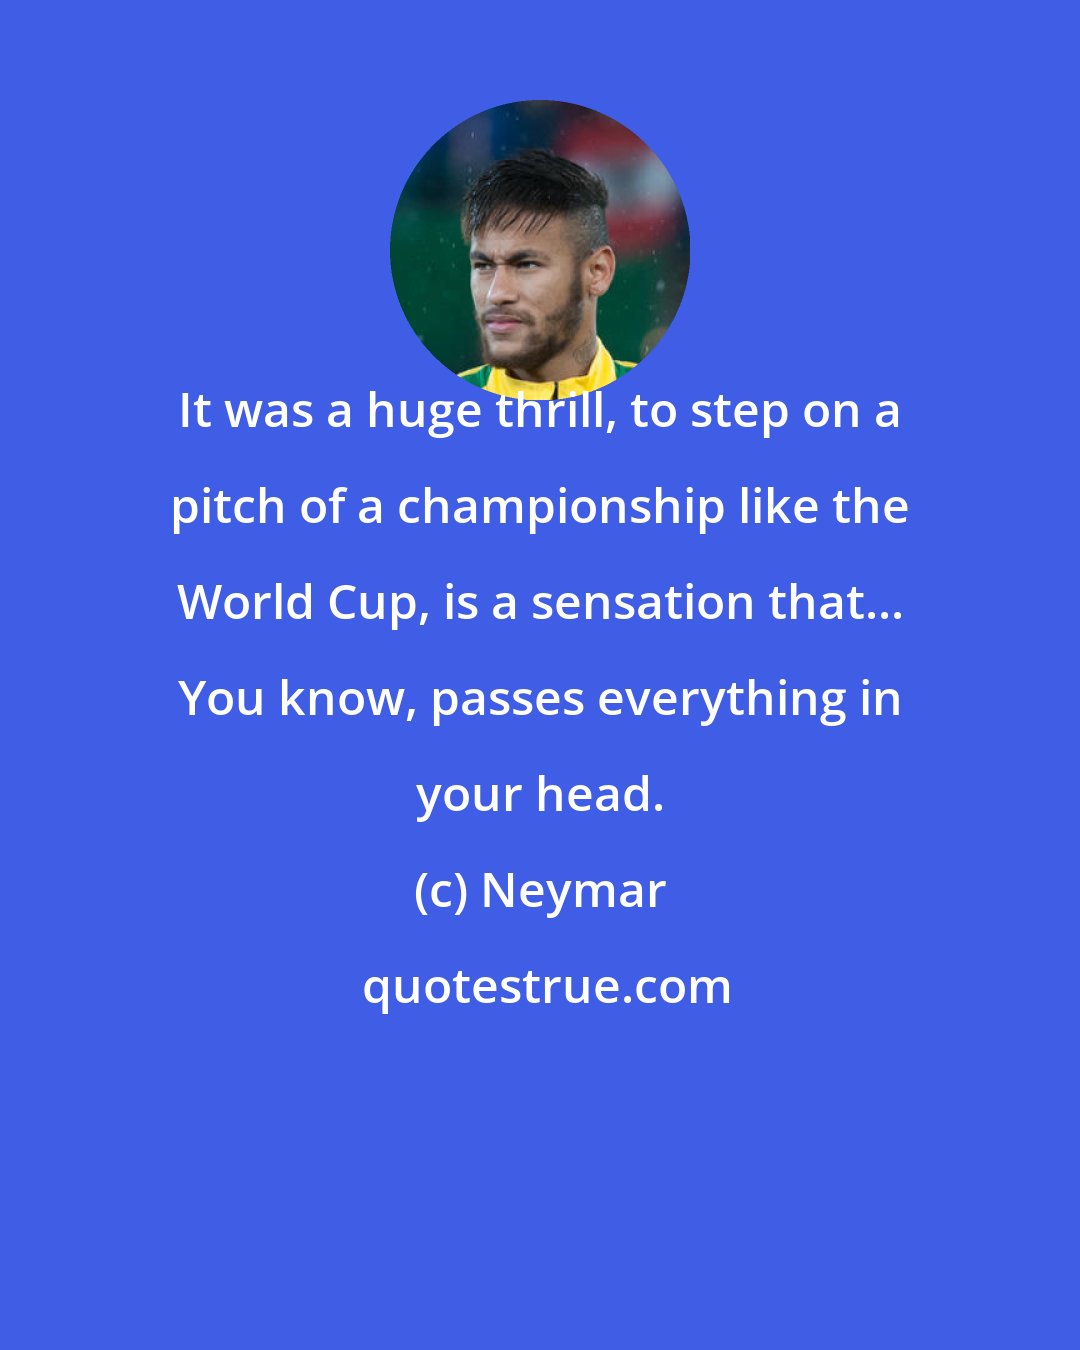 Neymar: It was a huge thrill, to step on a pitch of a championship like the World Cup, is a sensation that... You know, passes everything in your head.